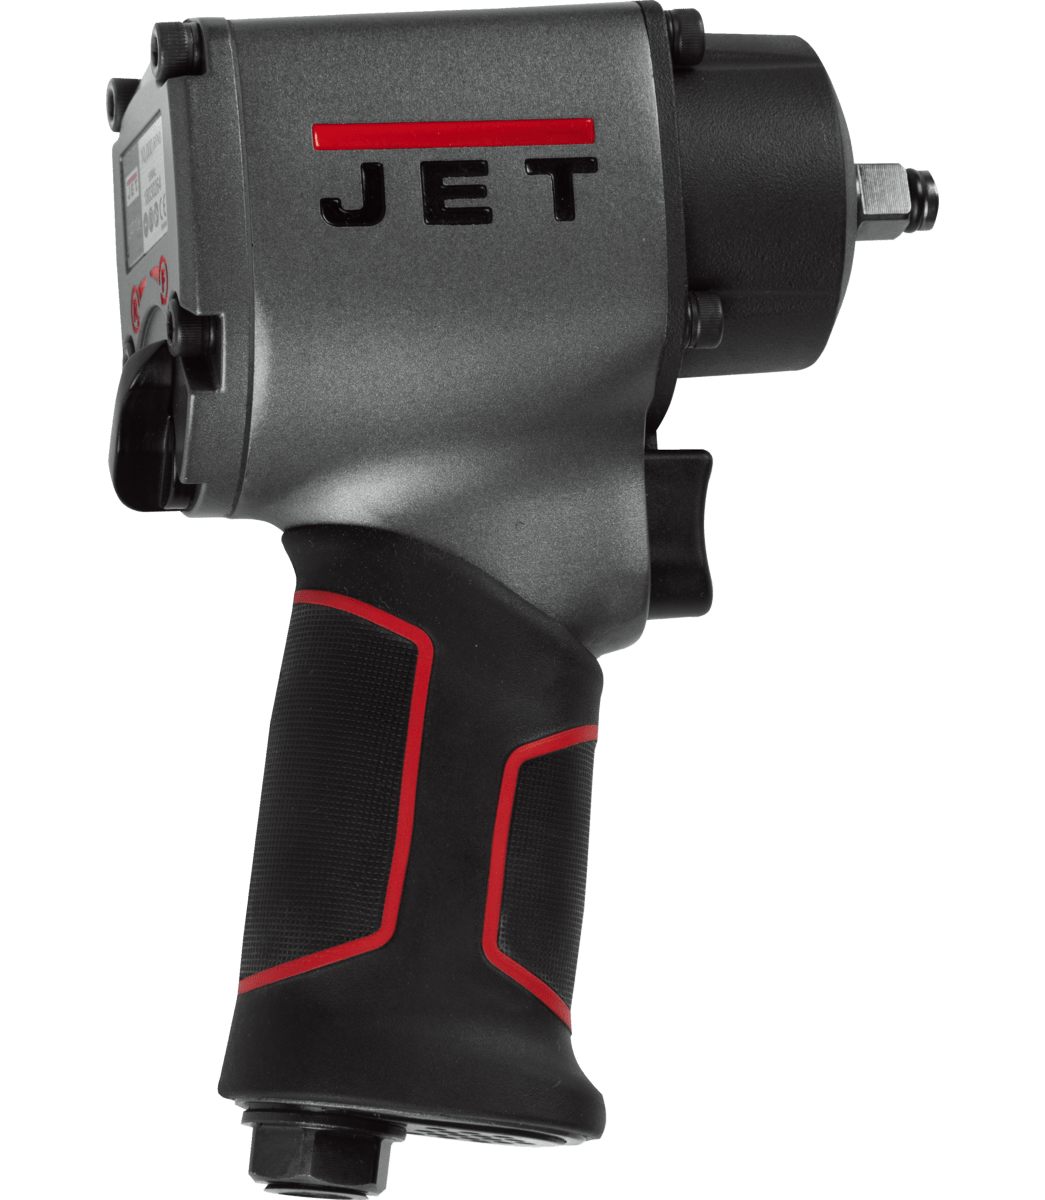 8" Compact Impact Wrench - Jet